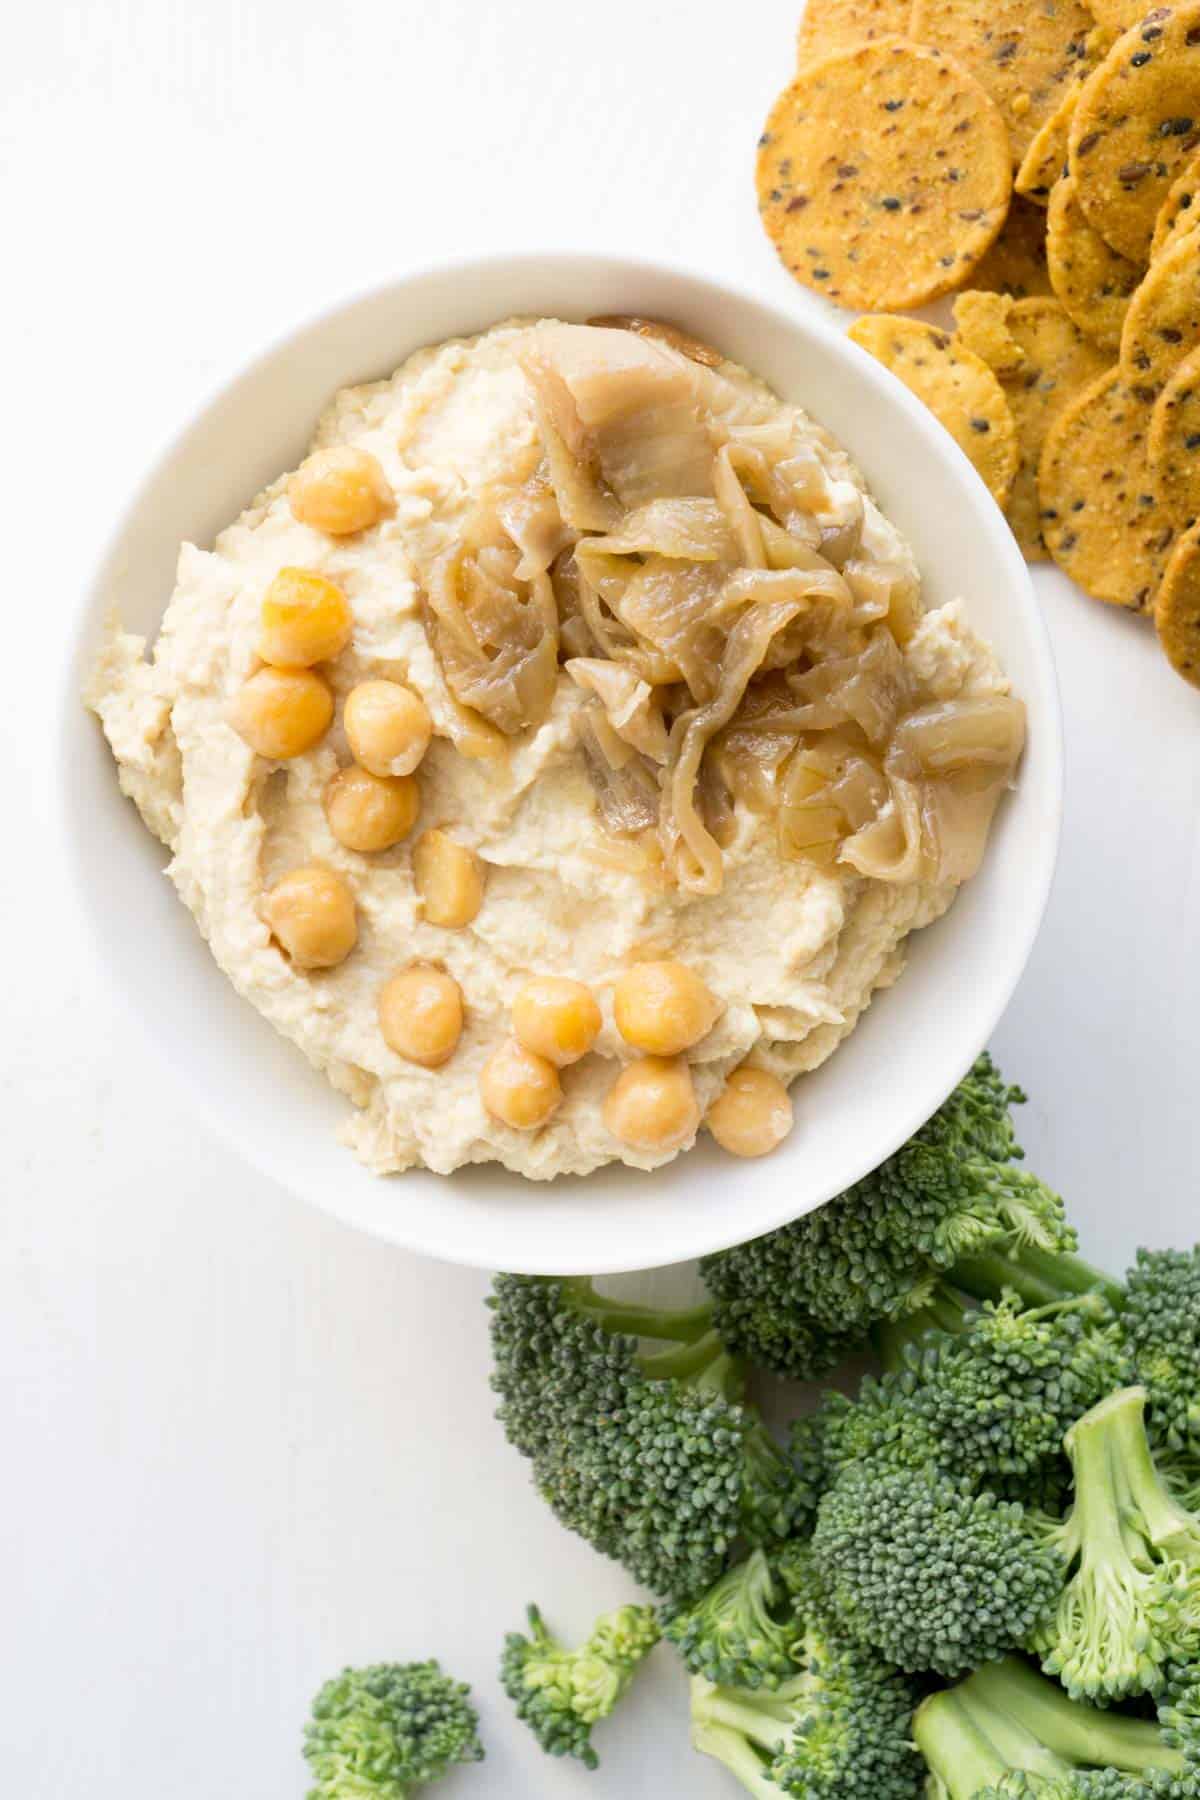 Caramelized Onion Hummus - Smart Nutrition with Jessica Penner, RD